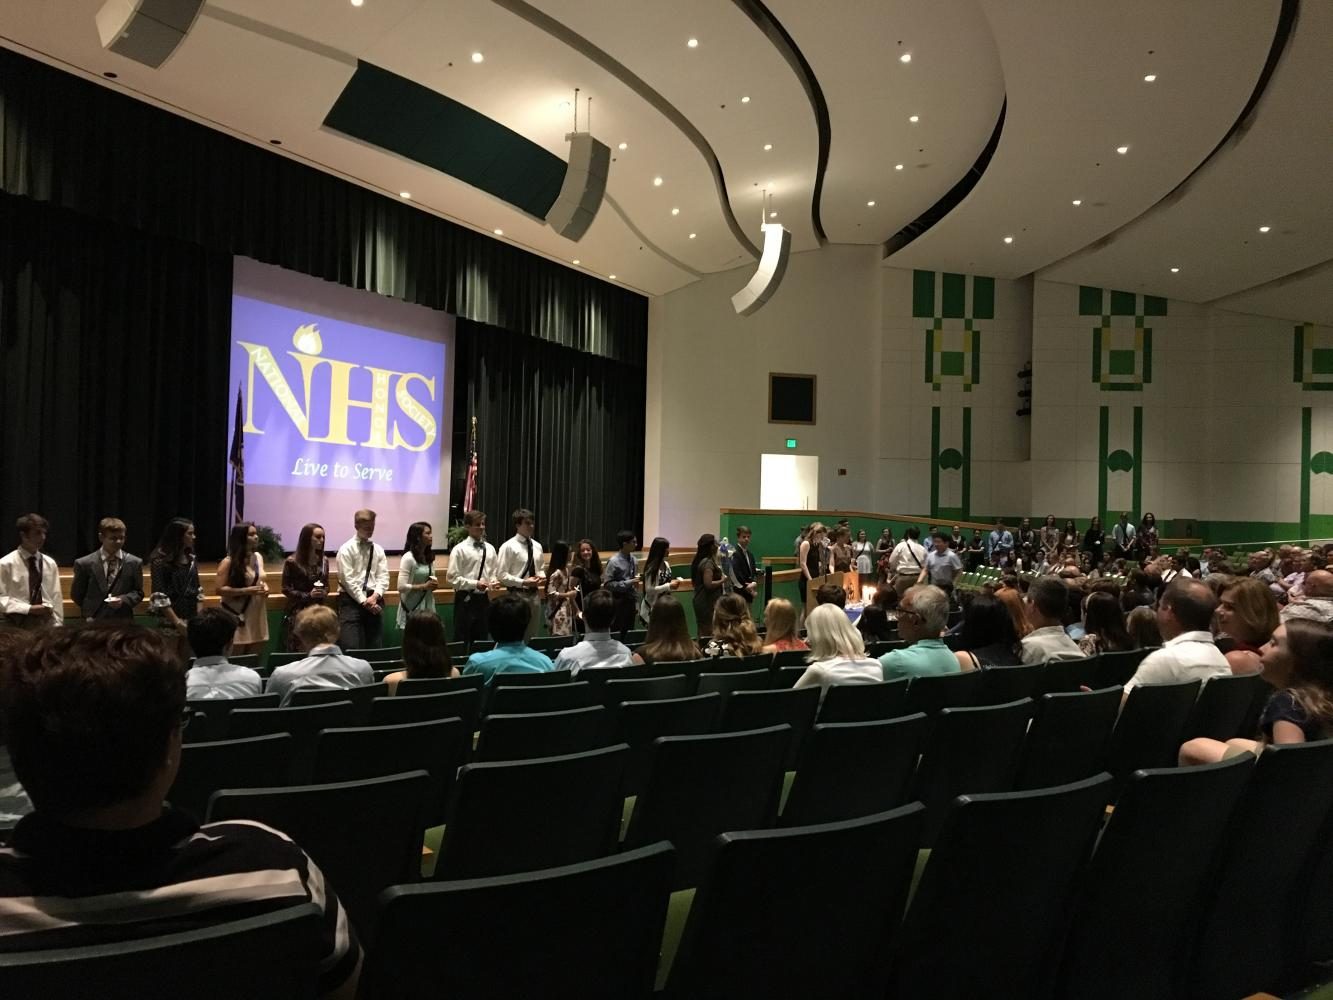 New+NHS+inductees%2C+parents%2C+and+teachers+gathered+in+the+auditorium+on+the+night+of+April+27+for+the+induction+ceremony.+